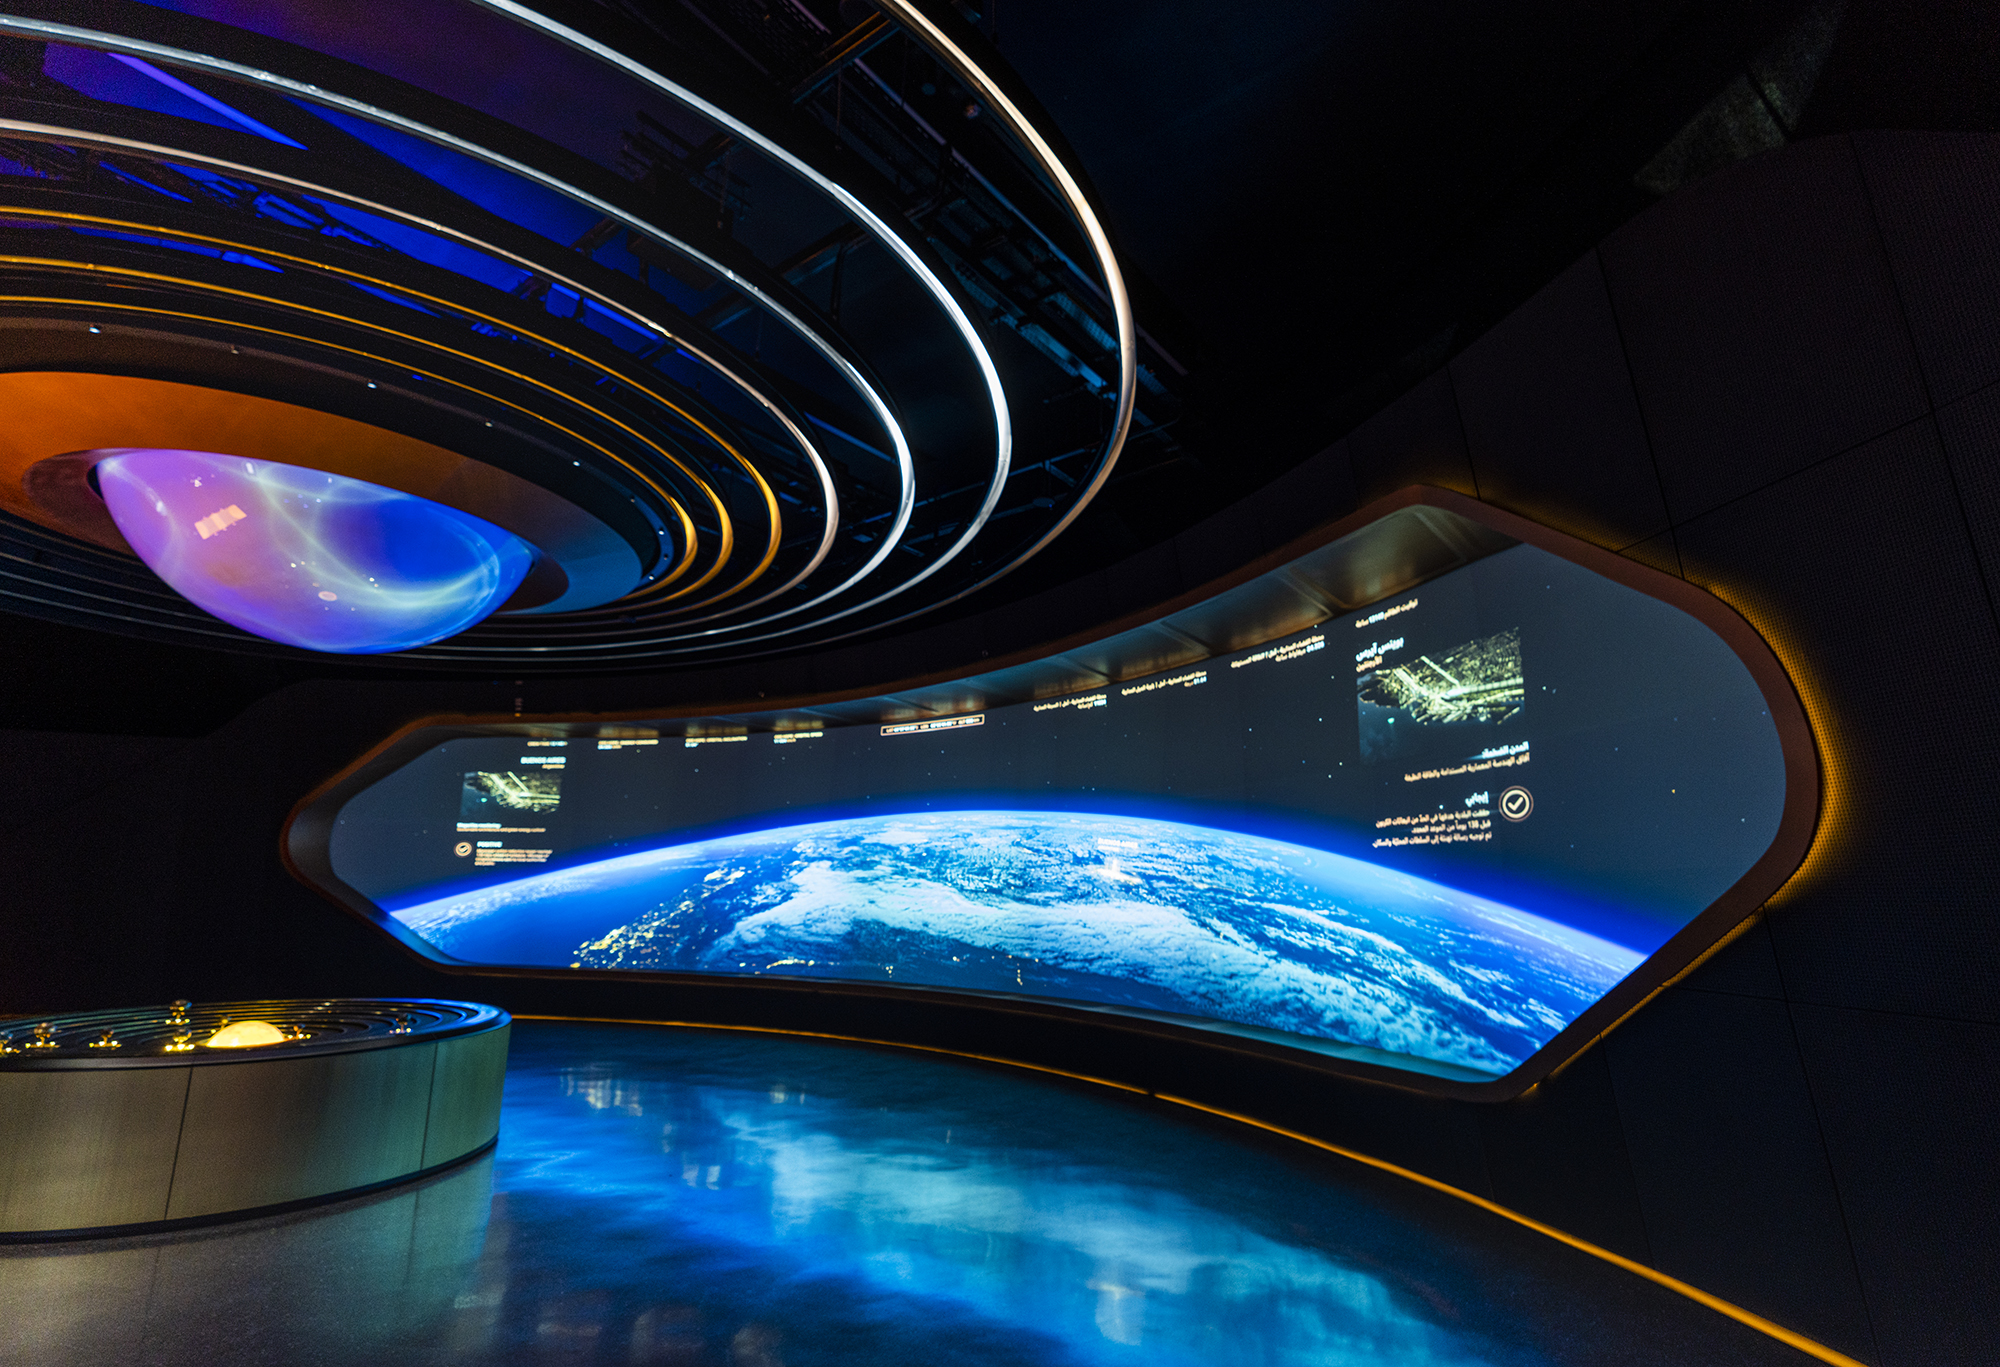 Museum of the Future space station with projection